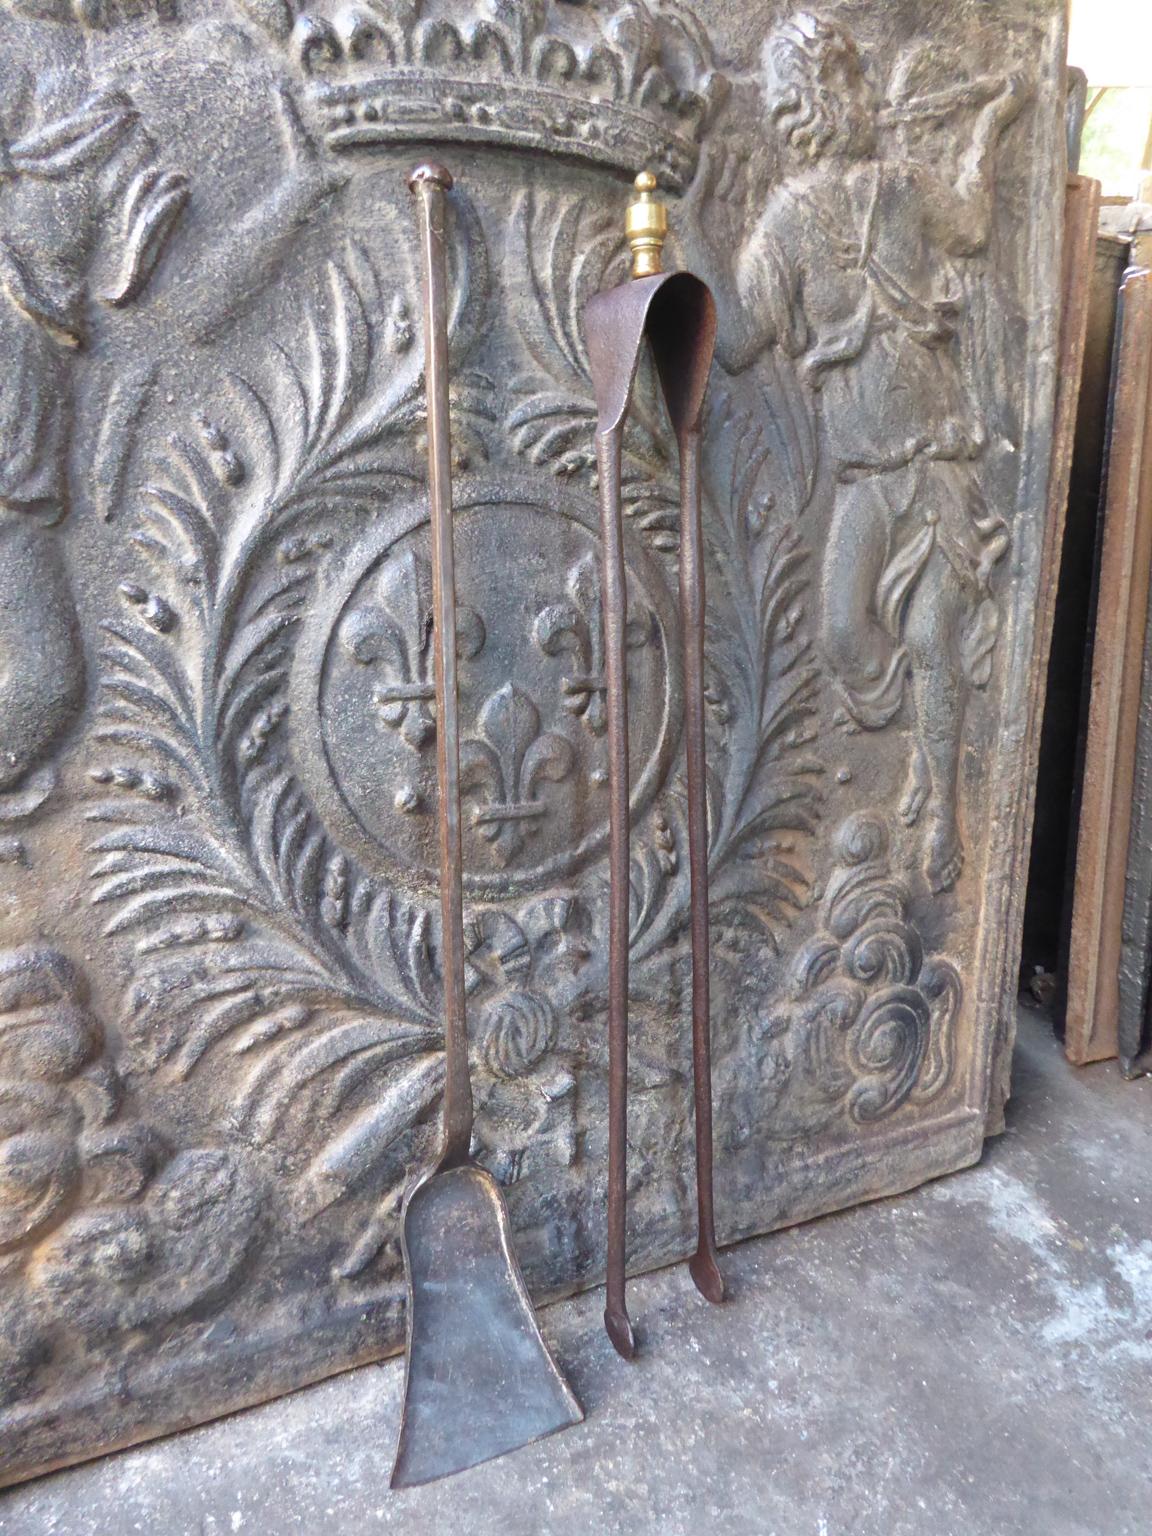 Large 18th century French Louis XV fireplace tool set consisting of fireplace tongs and a shovel. The fire irons are made of wrought iron. The tongs have a brass top. They are in a good condition and are fully functional.